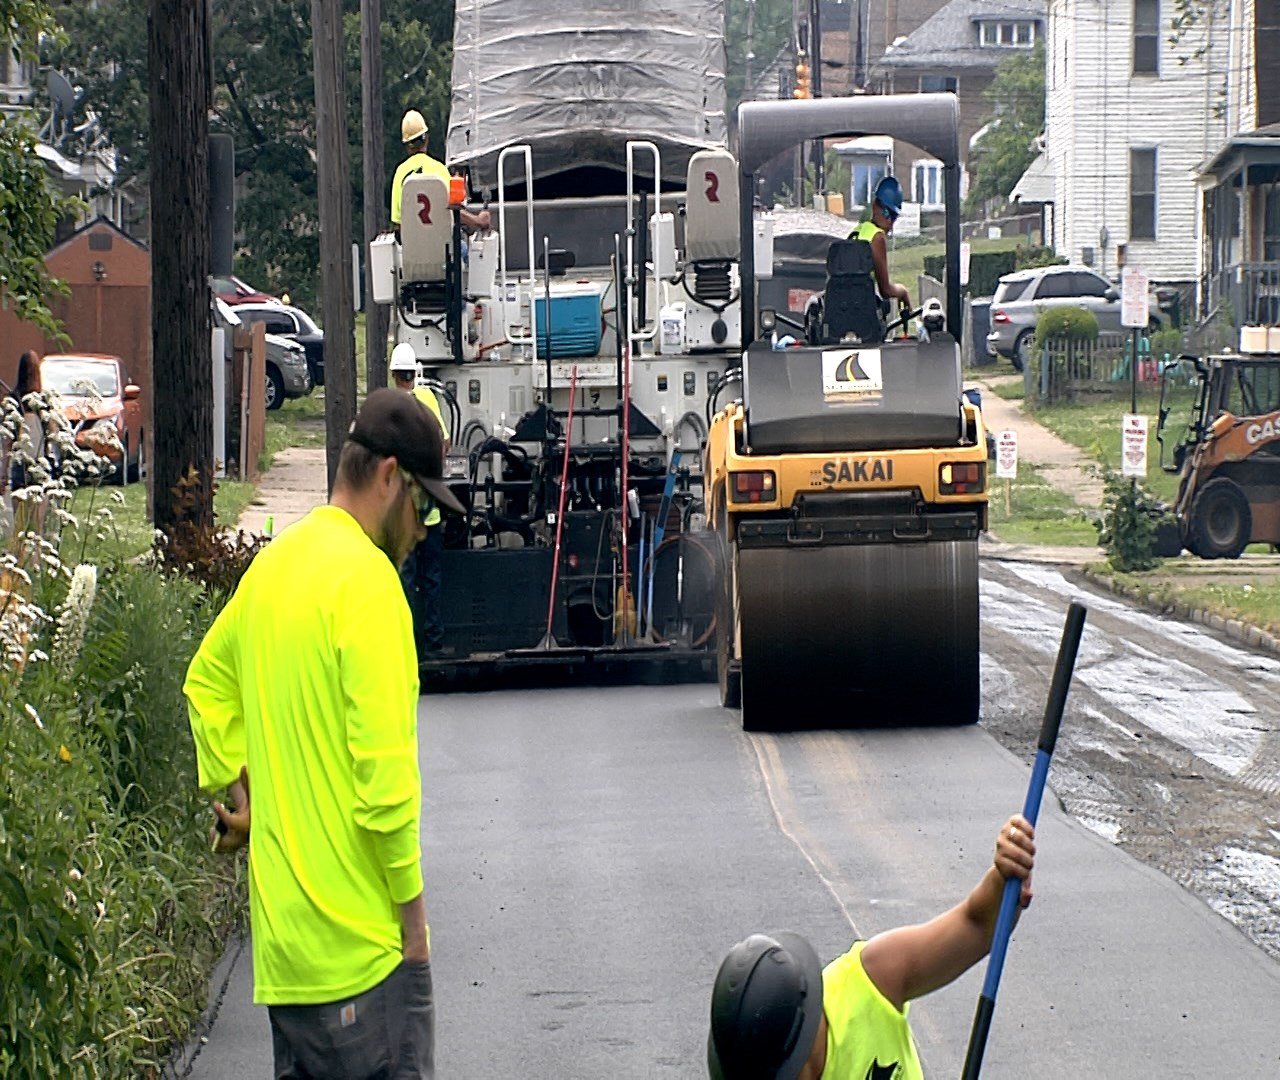 City of Erie Announces Paving Schedule for Week of July 11, 2022